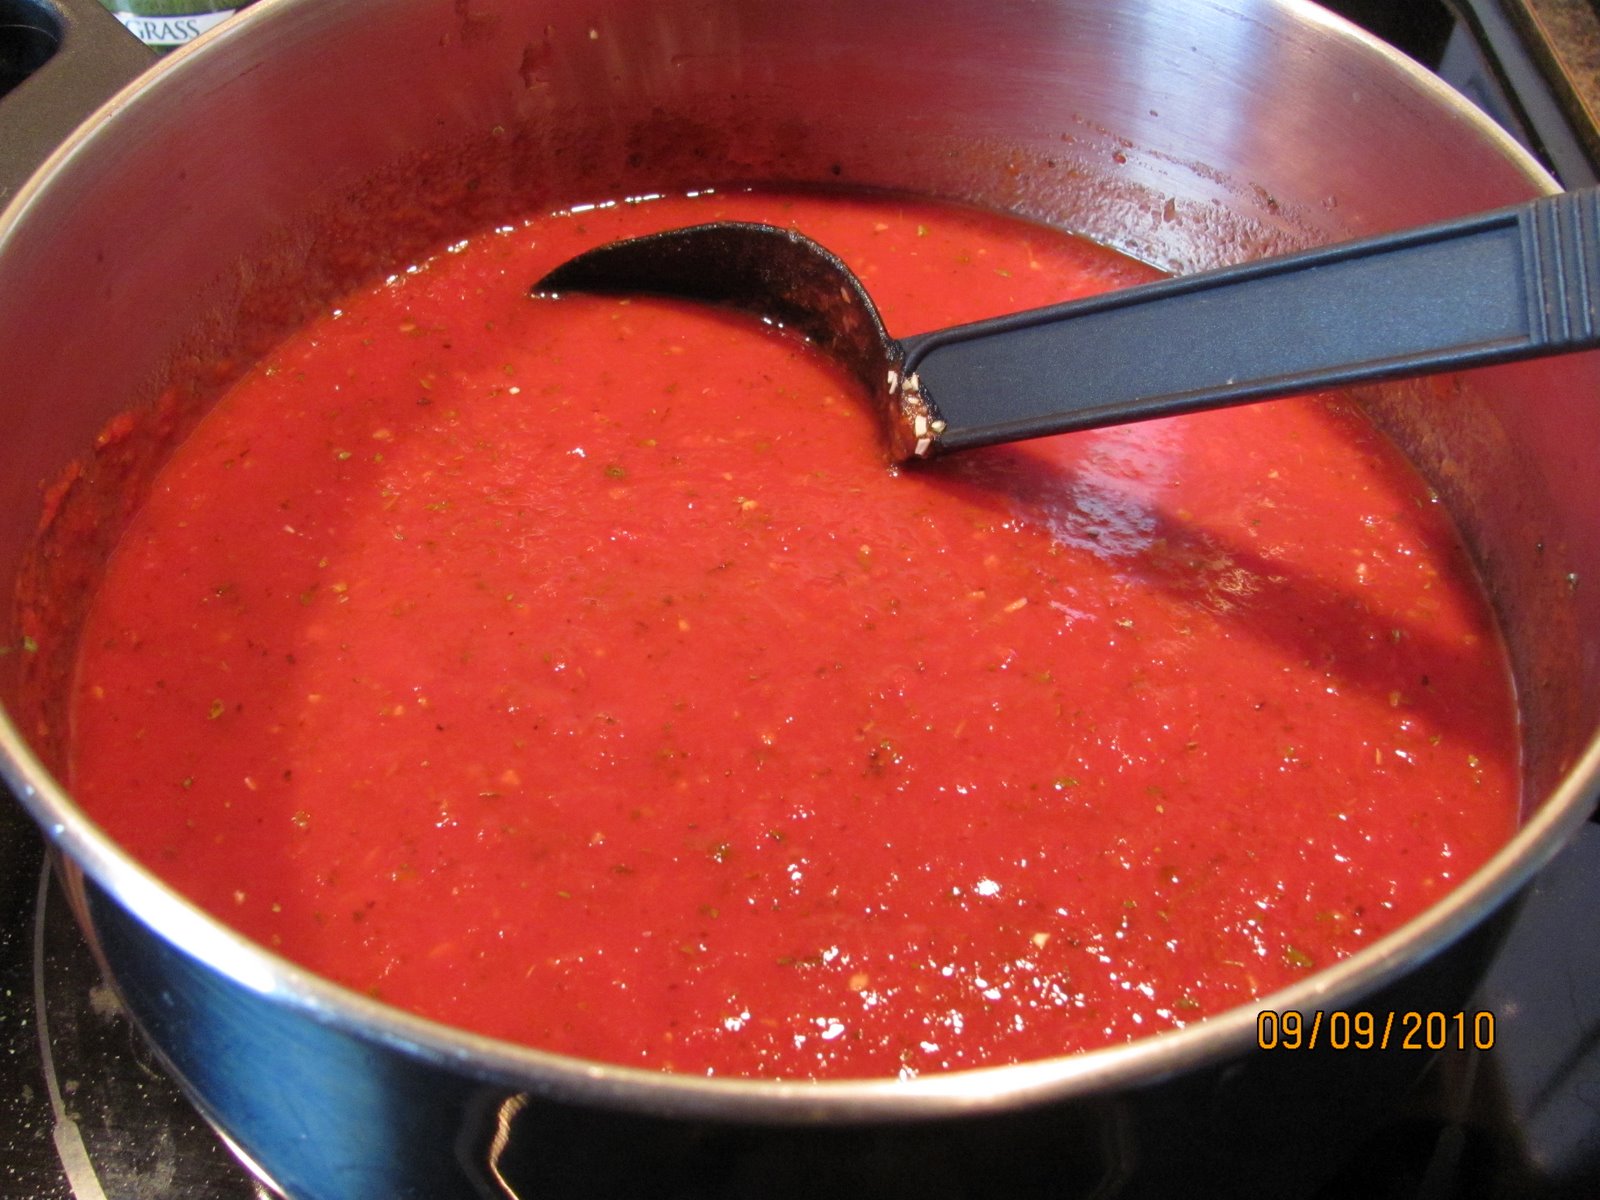 Spatini Spaghetti Sauce Mix Allergy and Ingredient Information